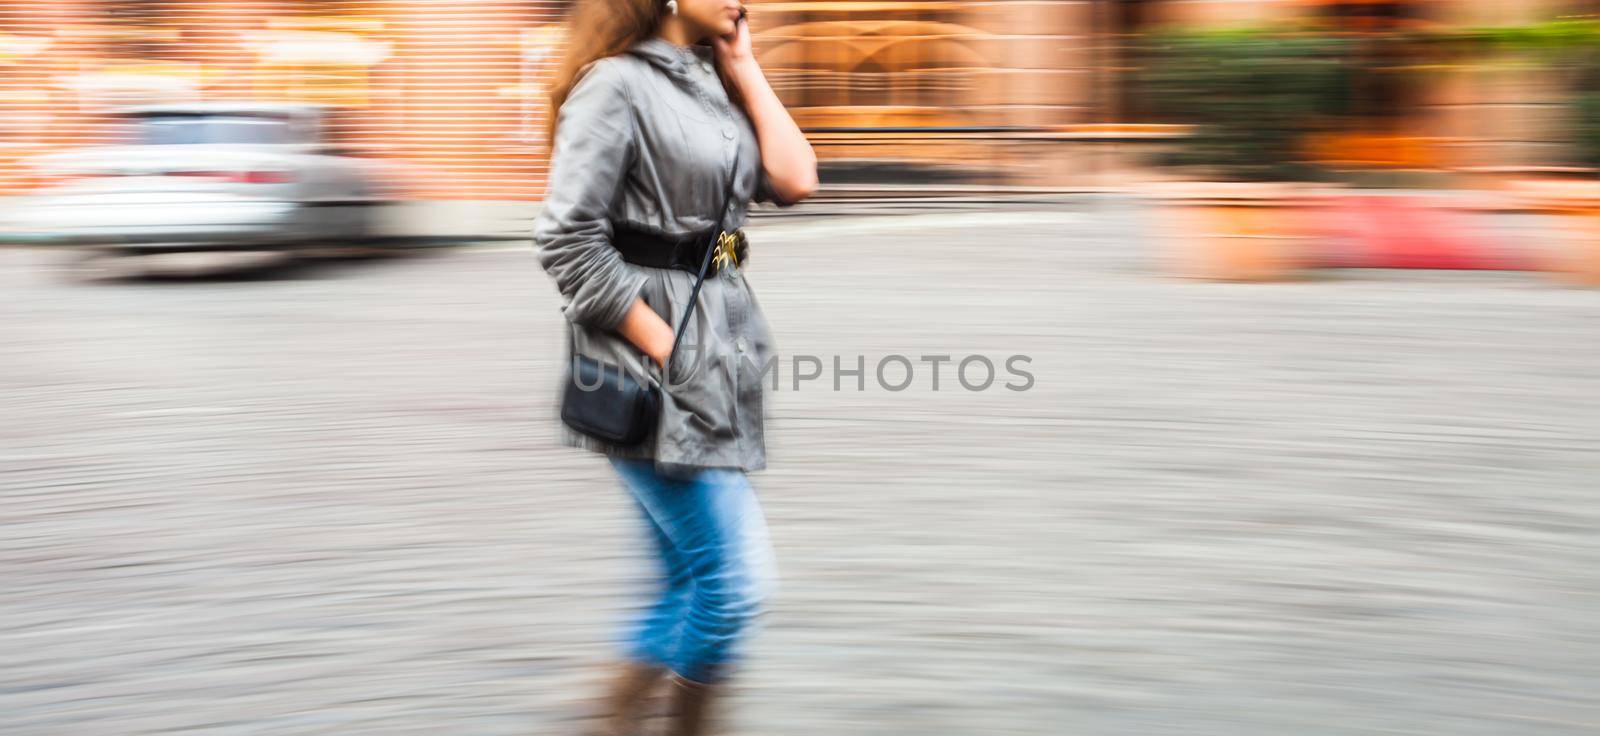 Abstract image of a young woman talking on a mobile phone on a city background with car. Intentional motion blur